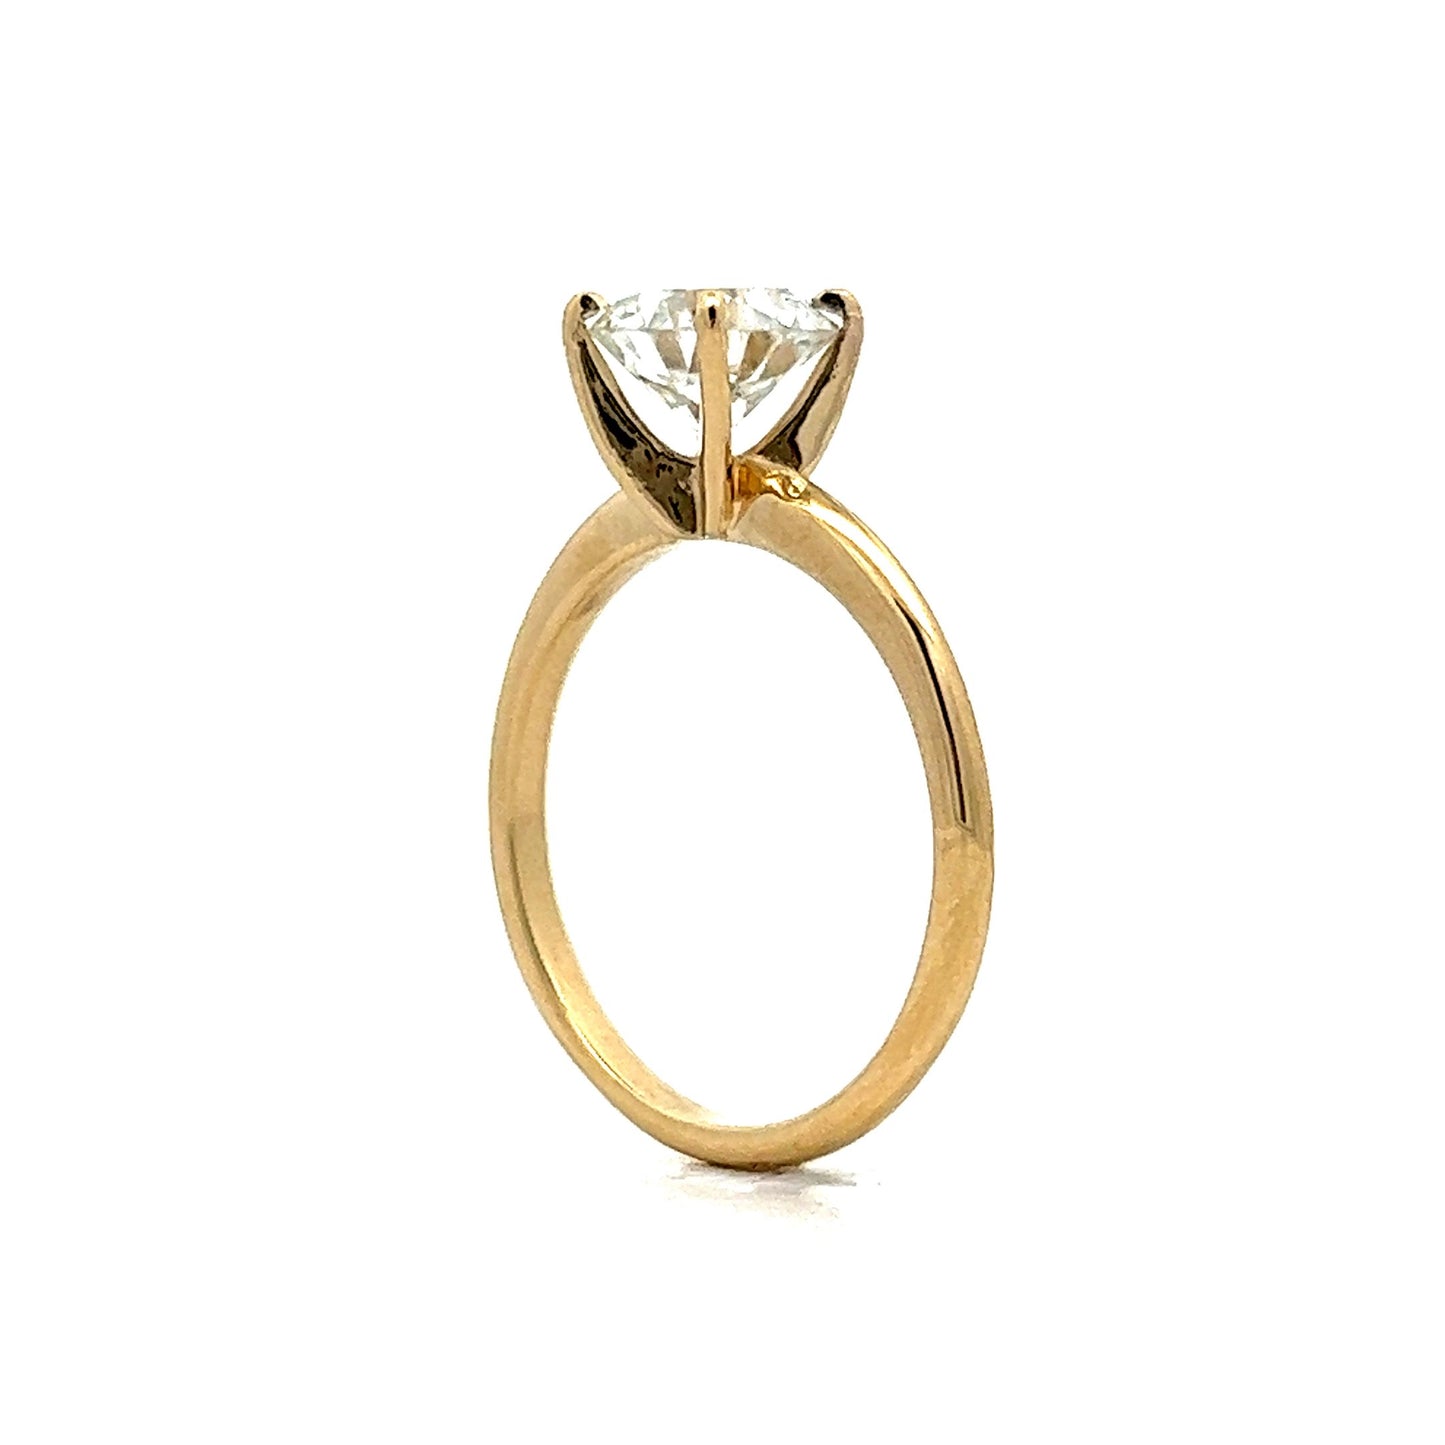 1.59 Transitional Diamond Solitaire Engagement Ring in Yellow Gold